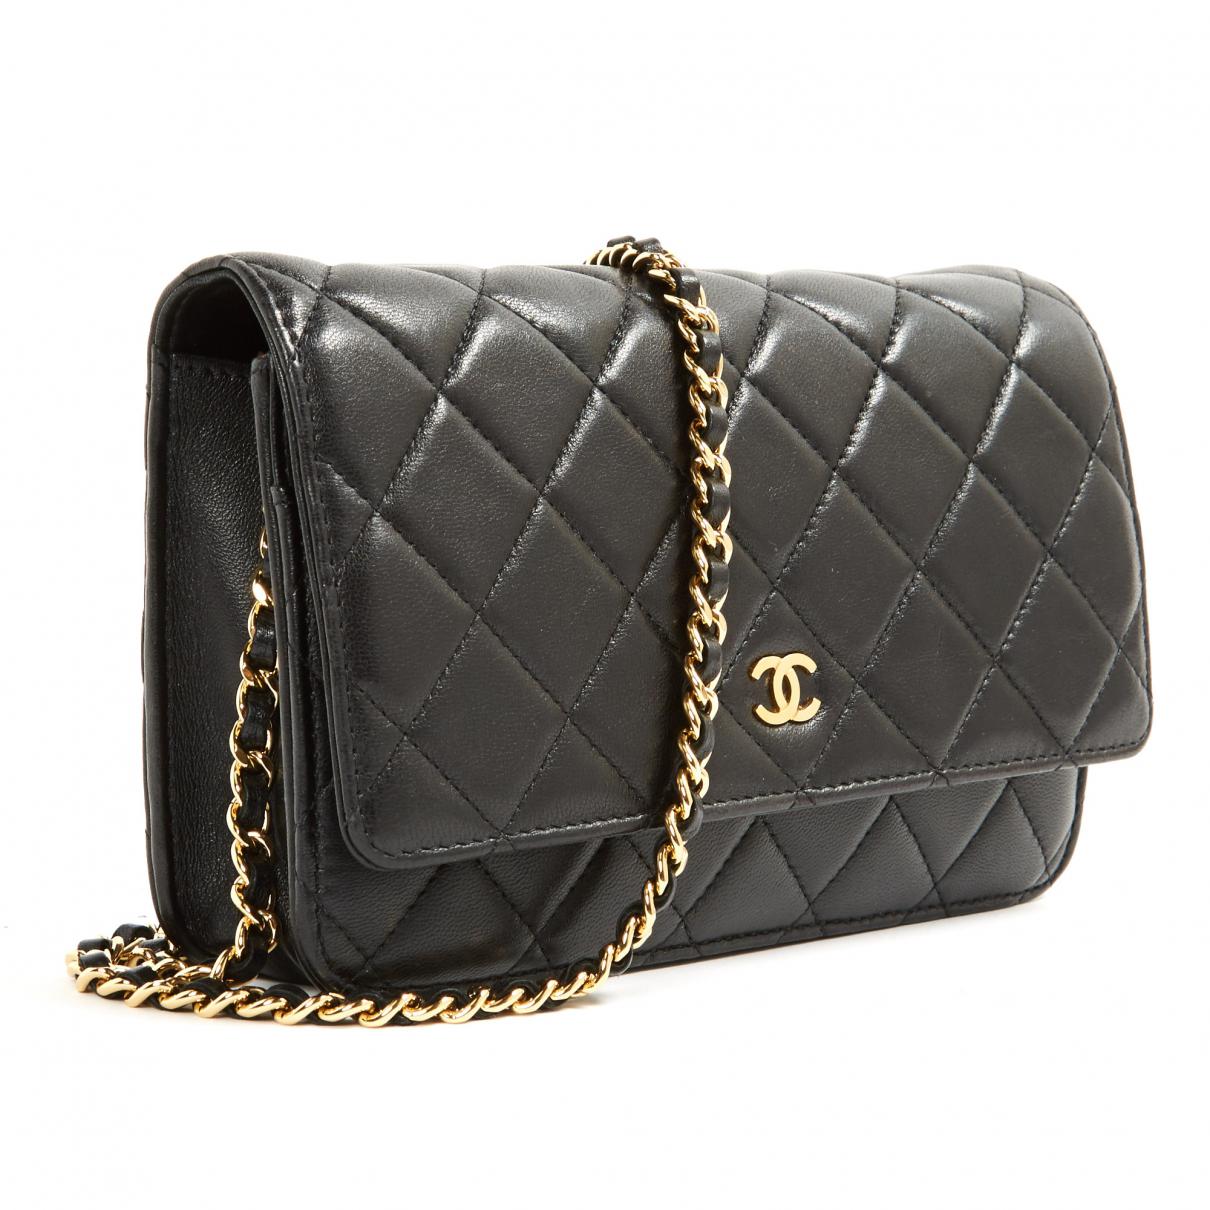 Chanel Wallet On Chain Leather Crossbody Bag in Black - Lyst